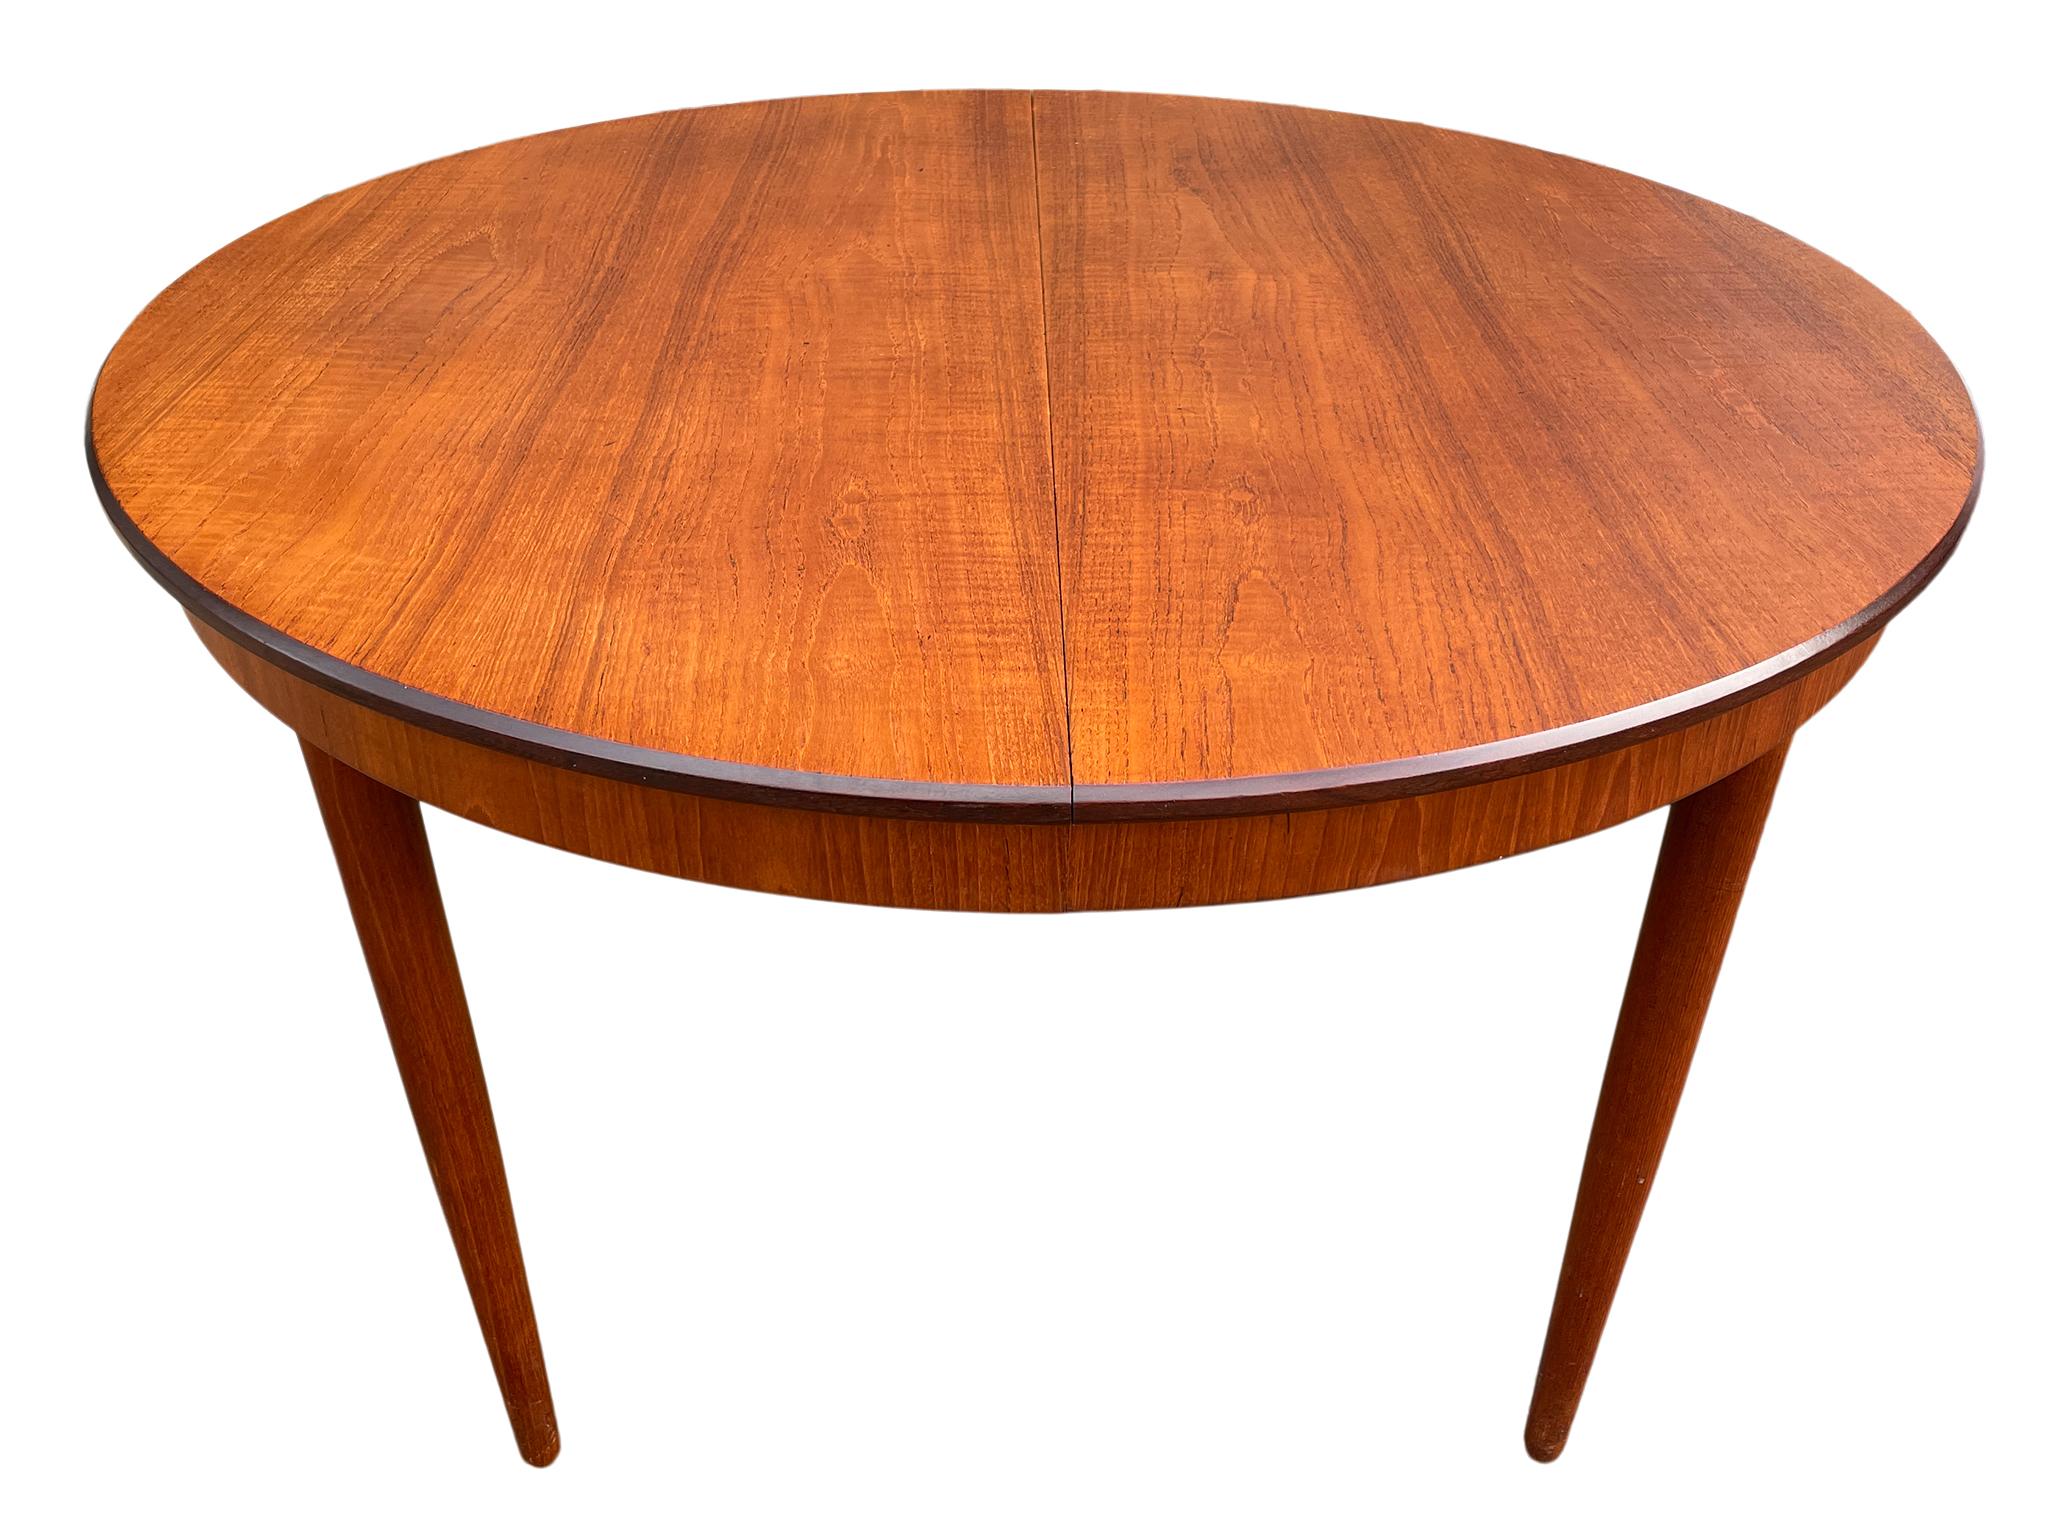 Midcentury teak round Danish Modern extension dining table with (3) leaves. This table has Solid teak legs that unscrew by hand. This table is in great vintage condition, (1) leaf with matches the table 100% and has an apron. Comes with (2) extra